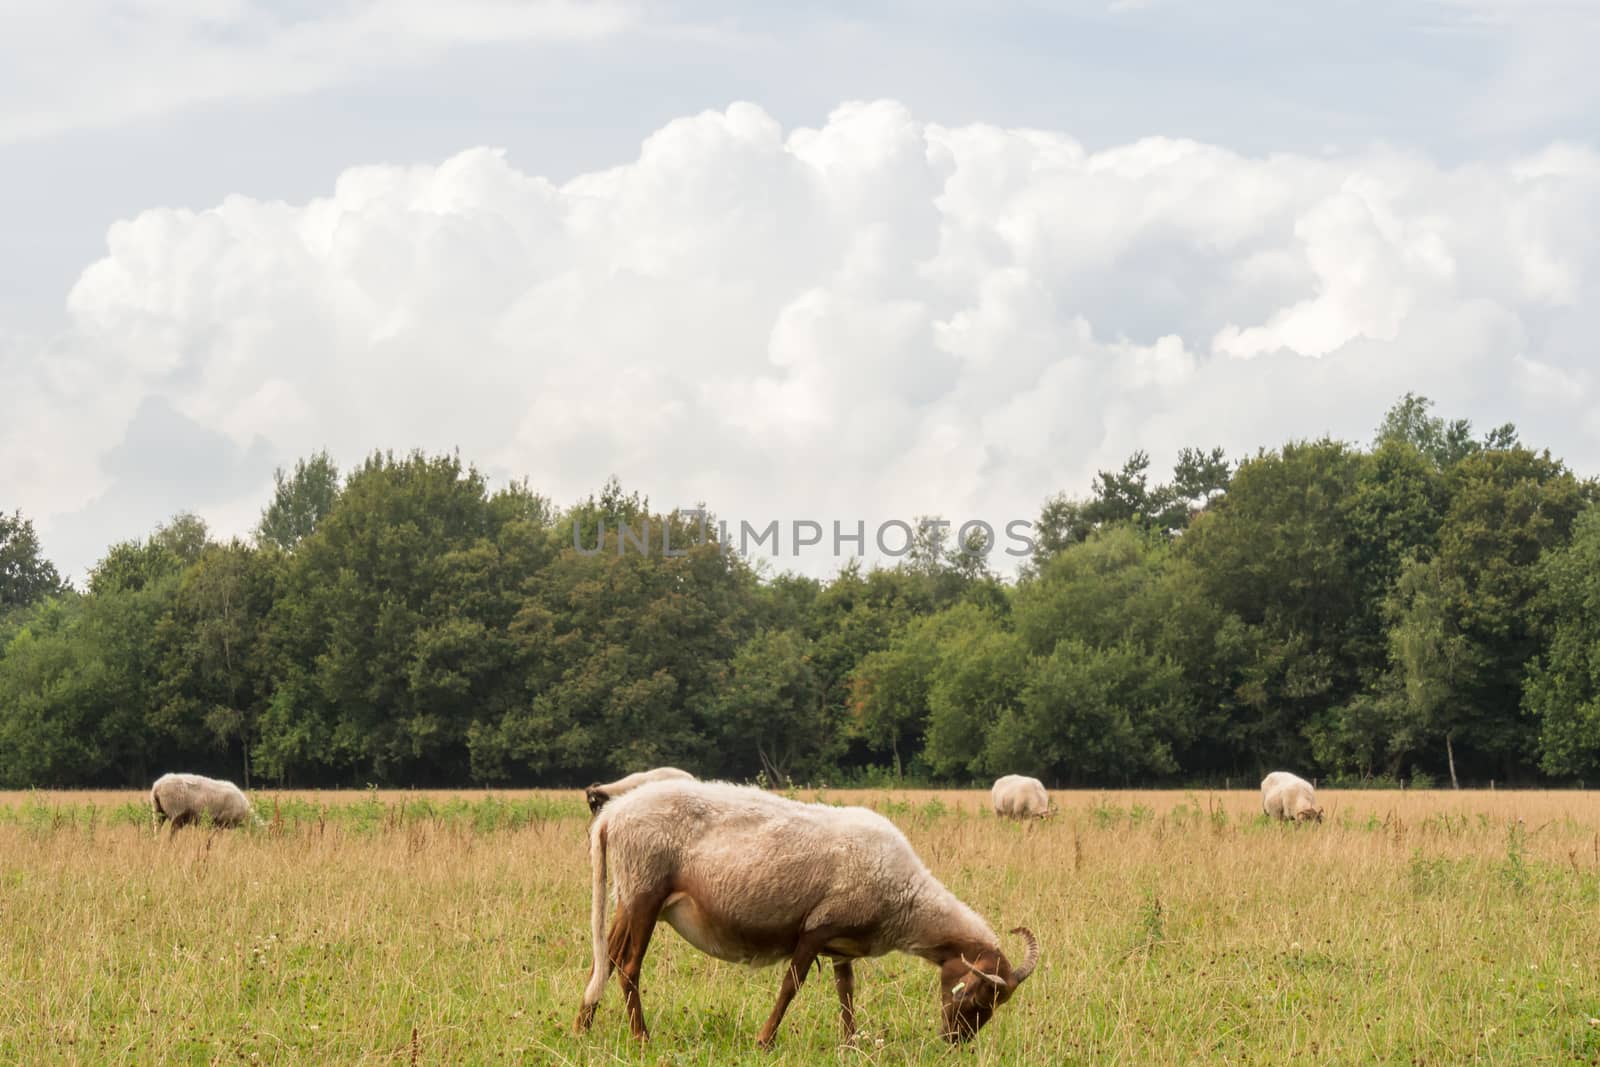 Solitary sheep with horns standing in a meadow with a big cloud overhead